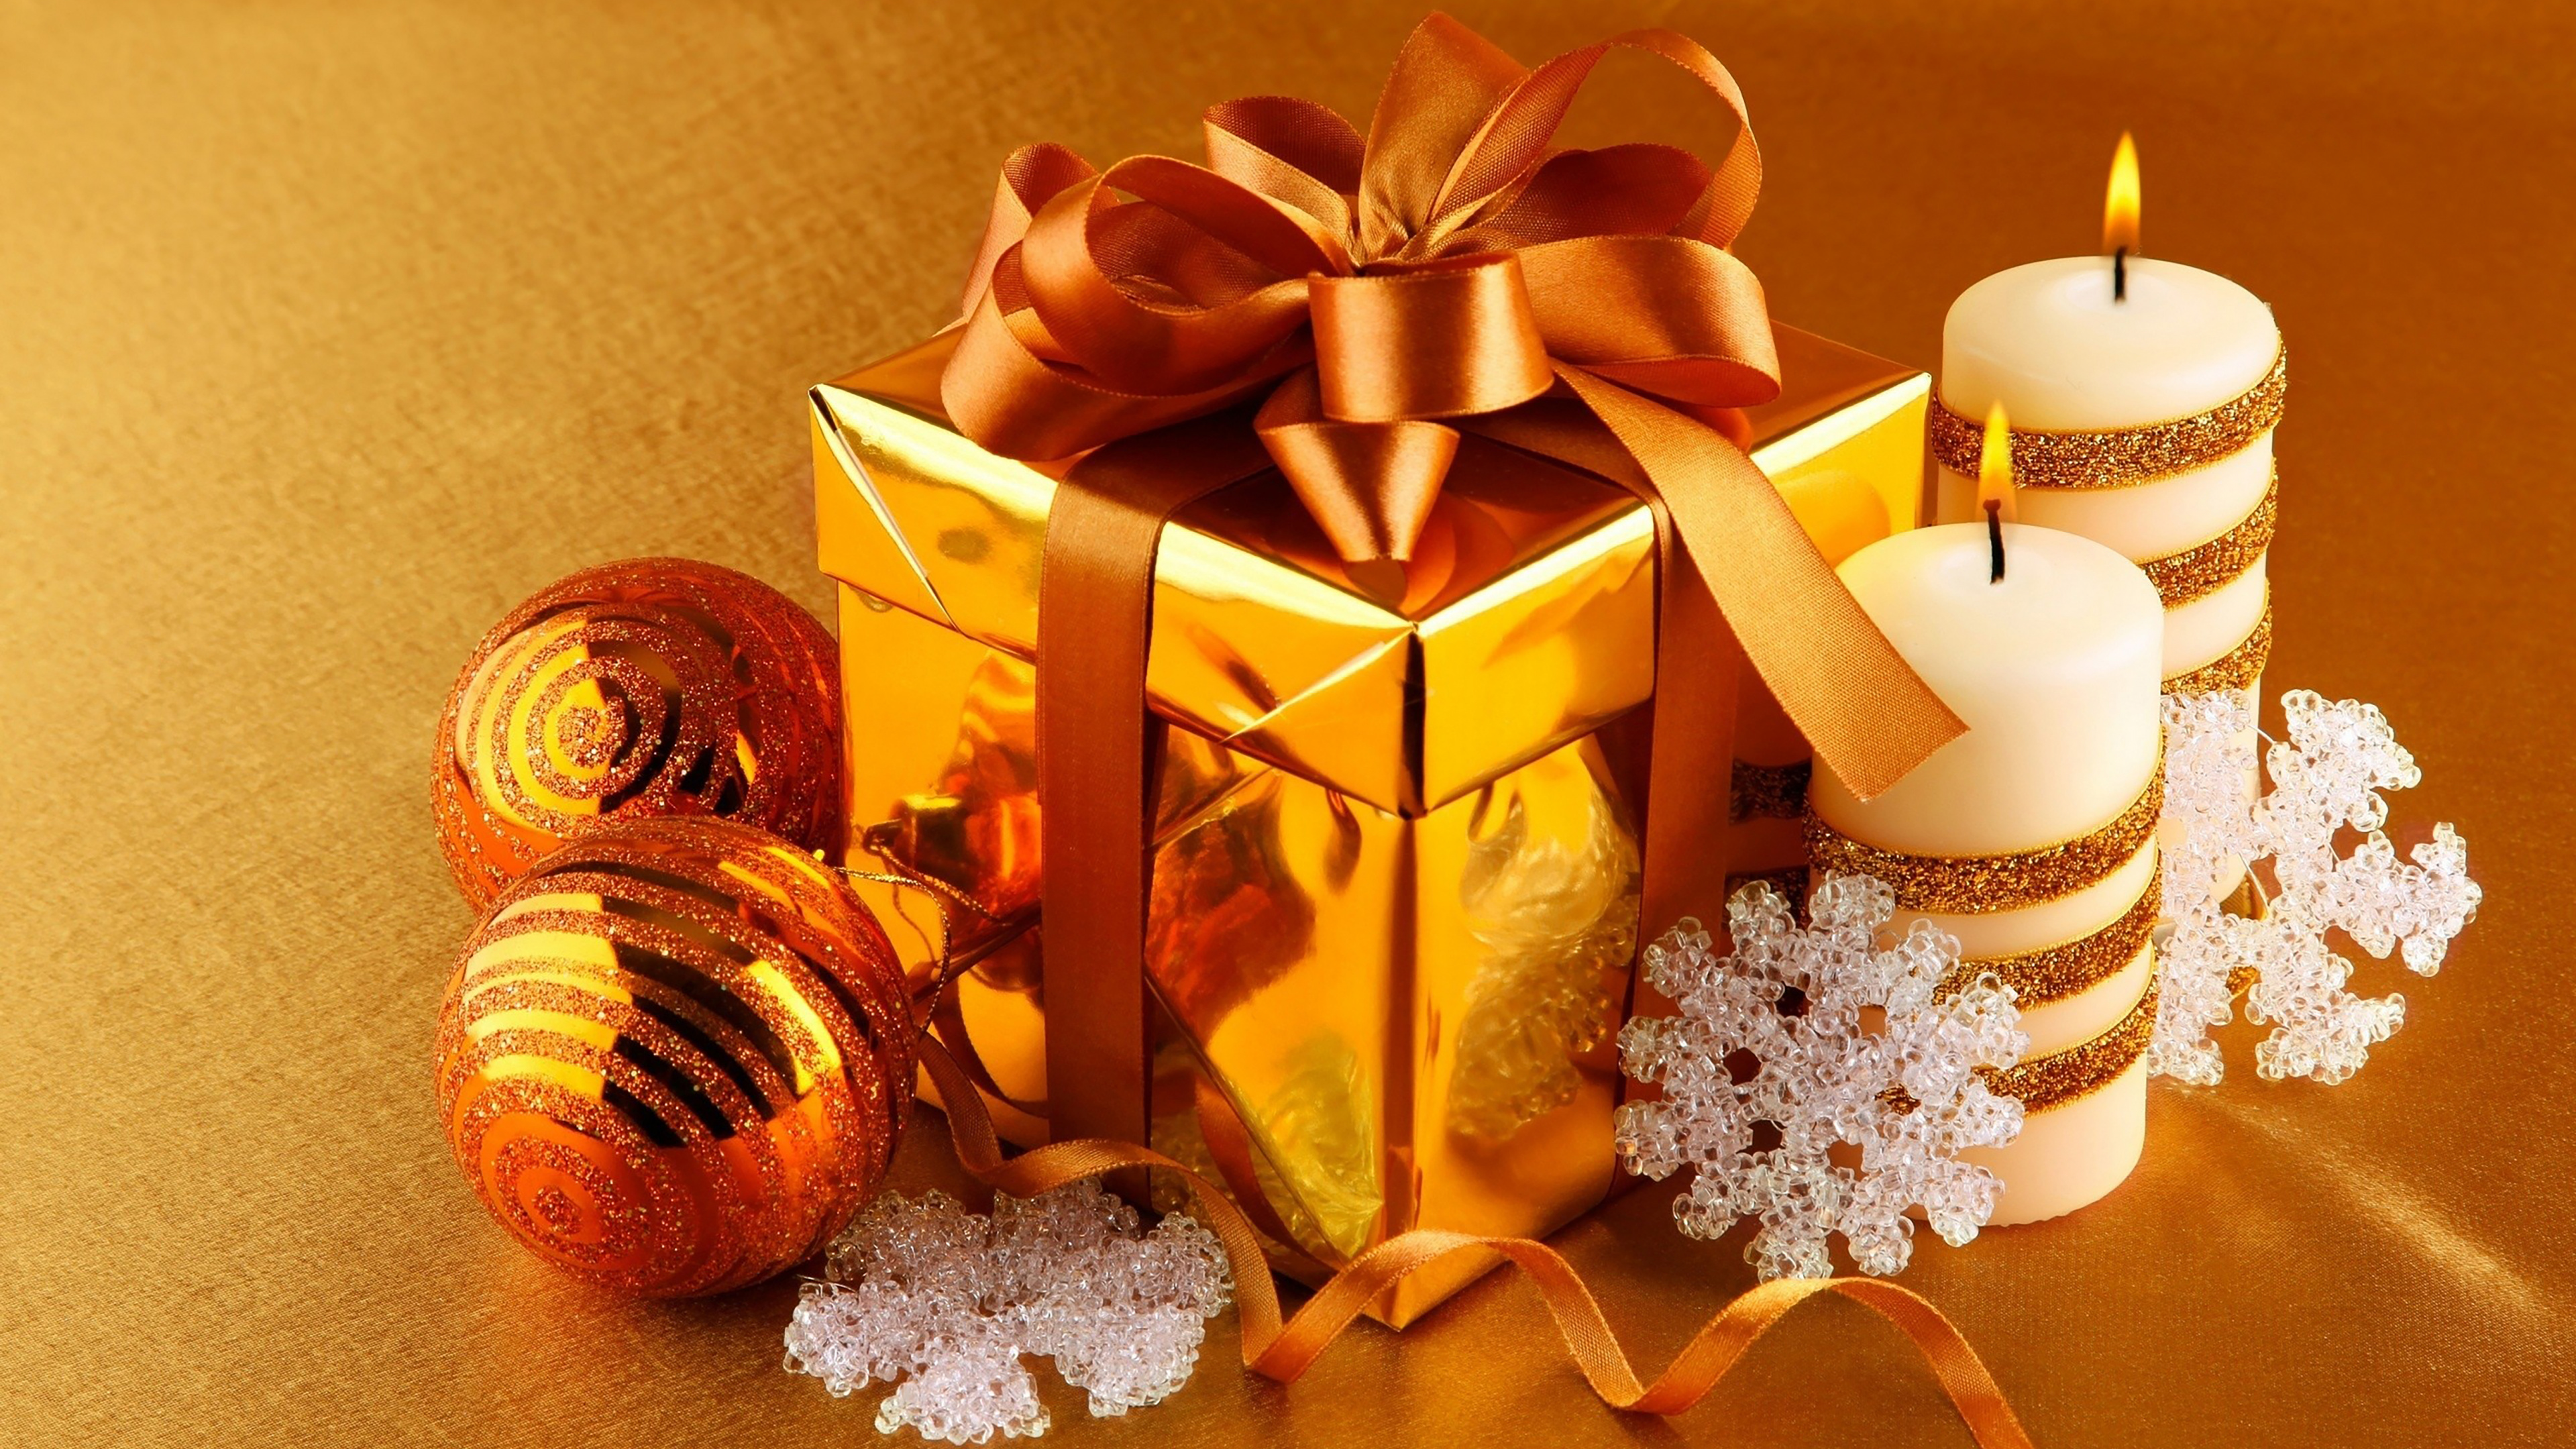 Christmas Day, Christmas Ornament, Present, Christmas Decoration, Gift Wrapping. Wallpaper in 3840x2160 Resolution